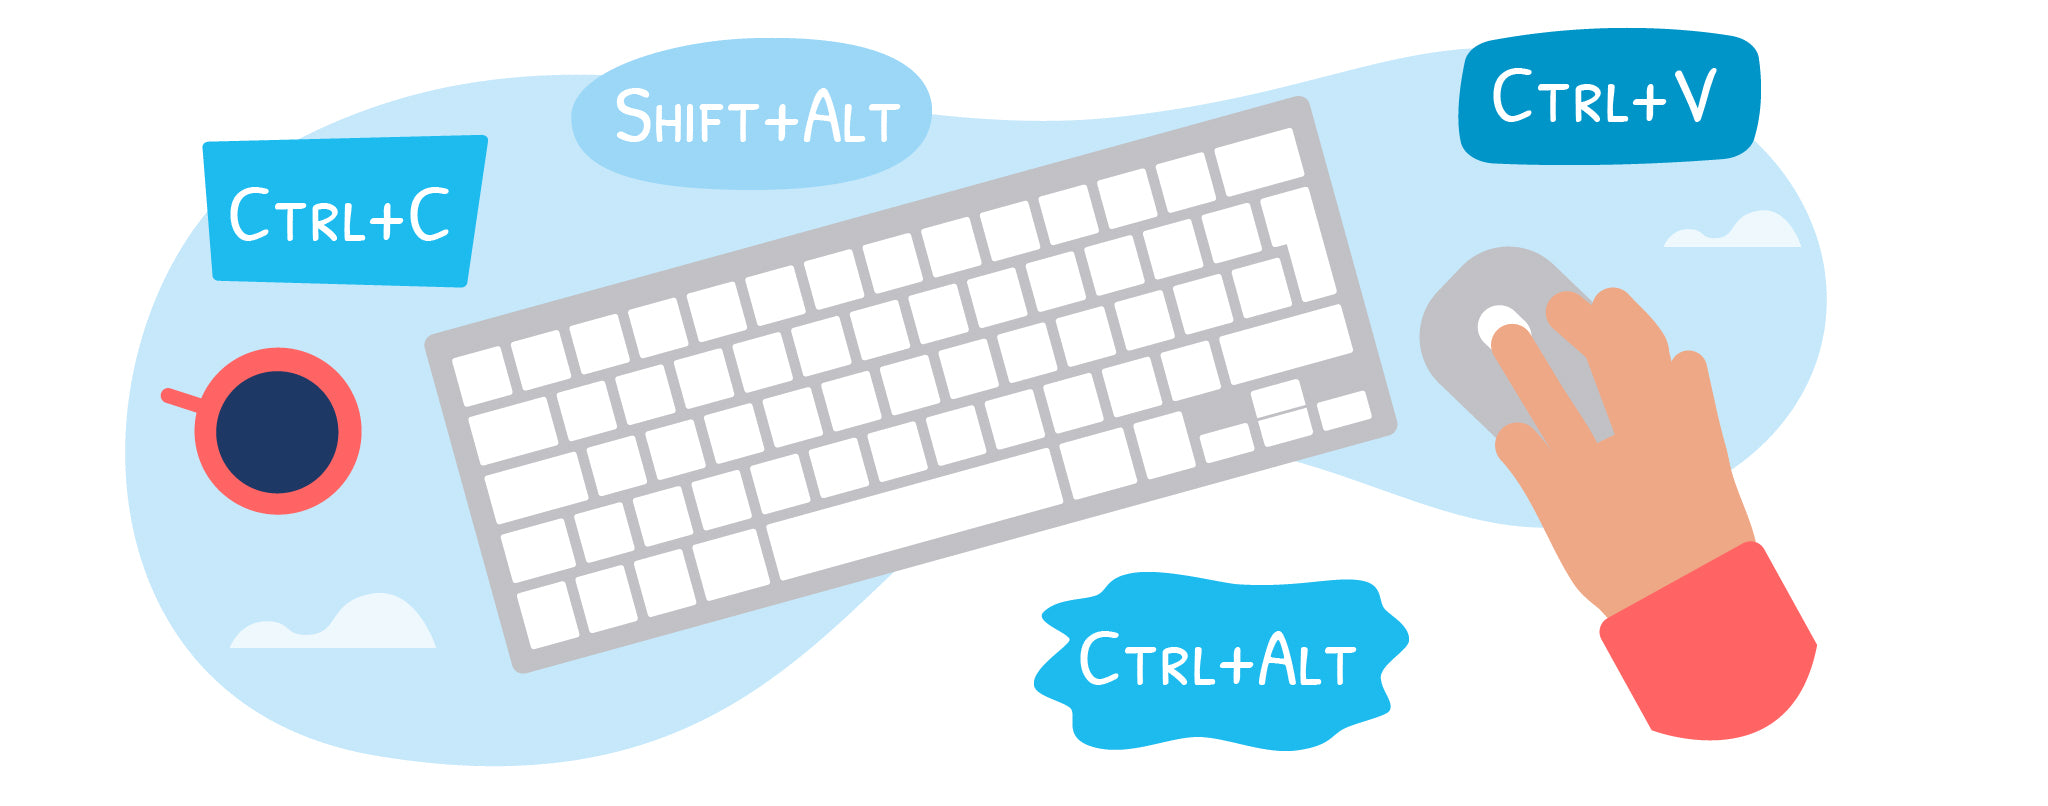 What Are Keyboard Shortcuts? The 5 Most Common Shortcuts for Windows and MacOS